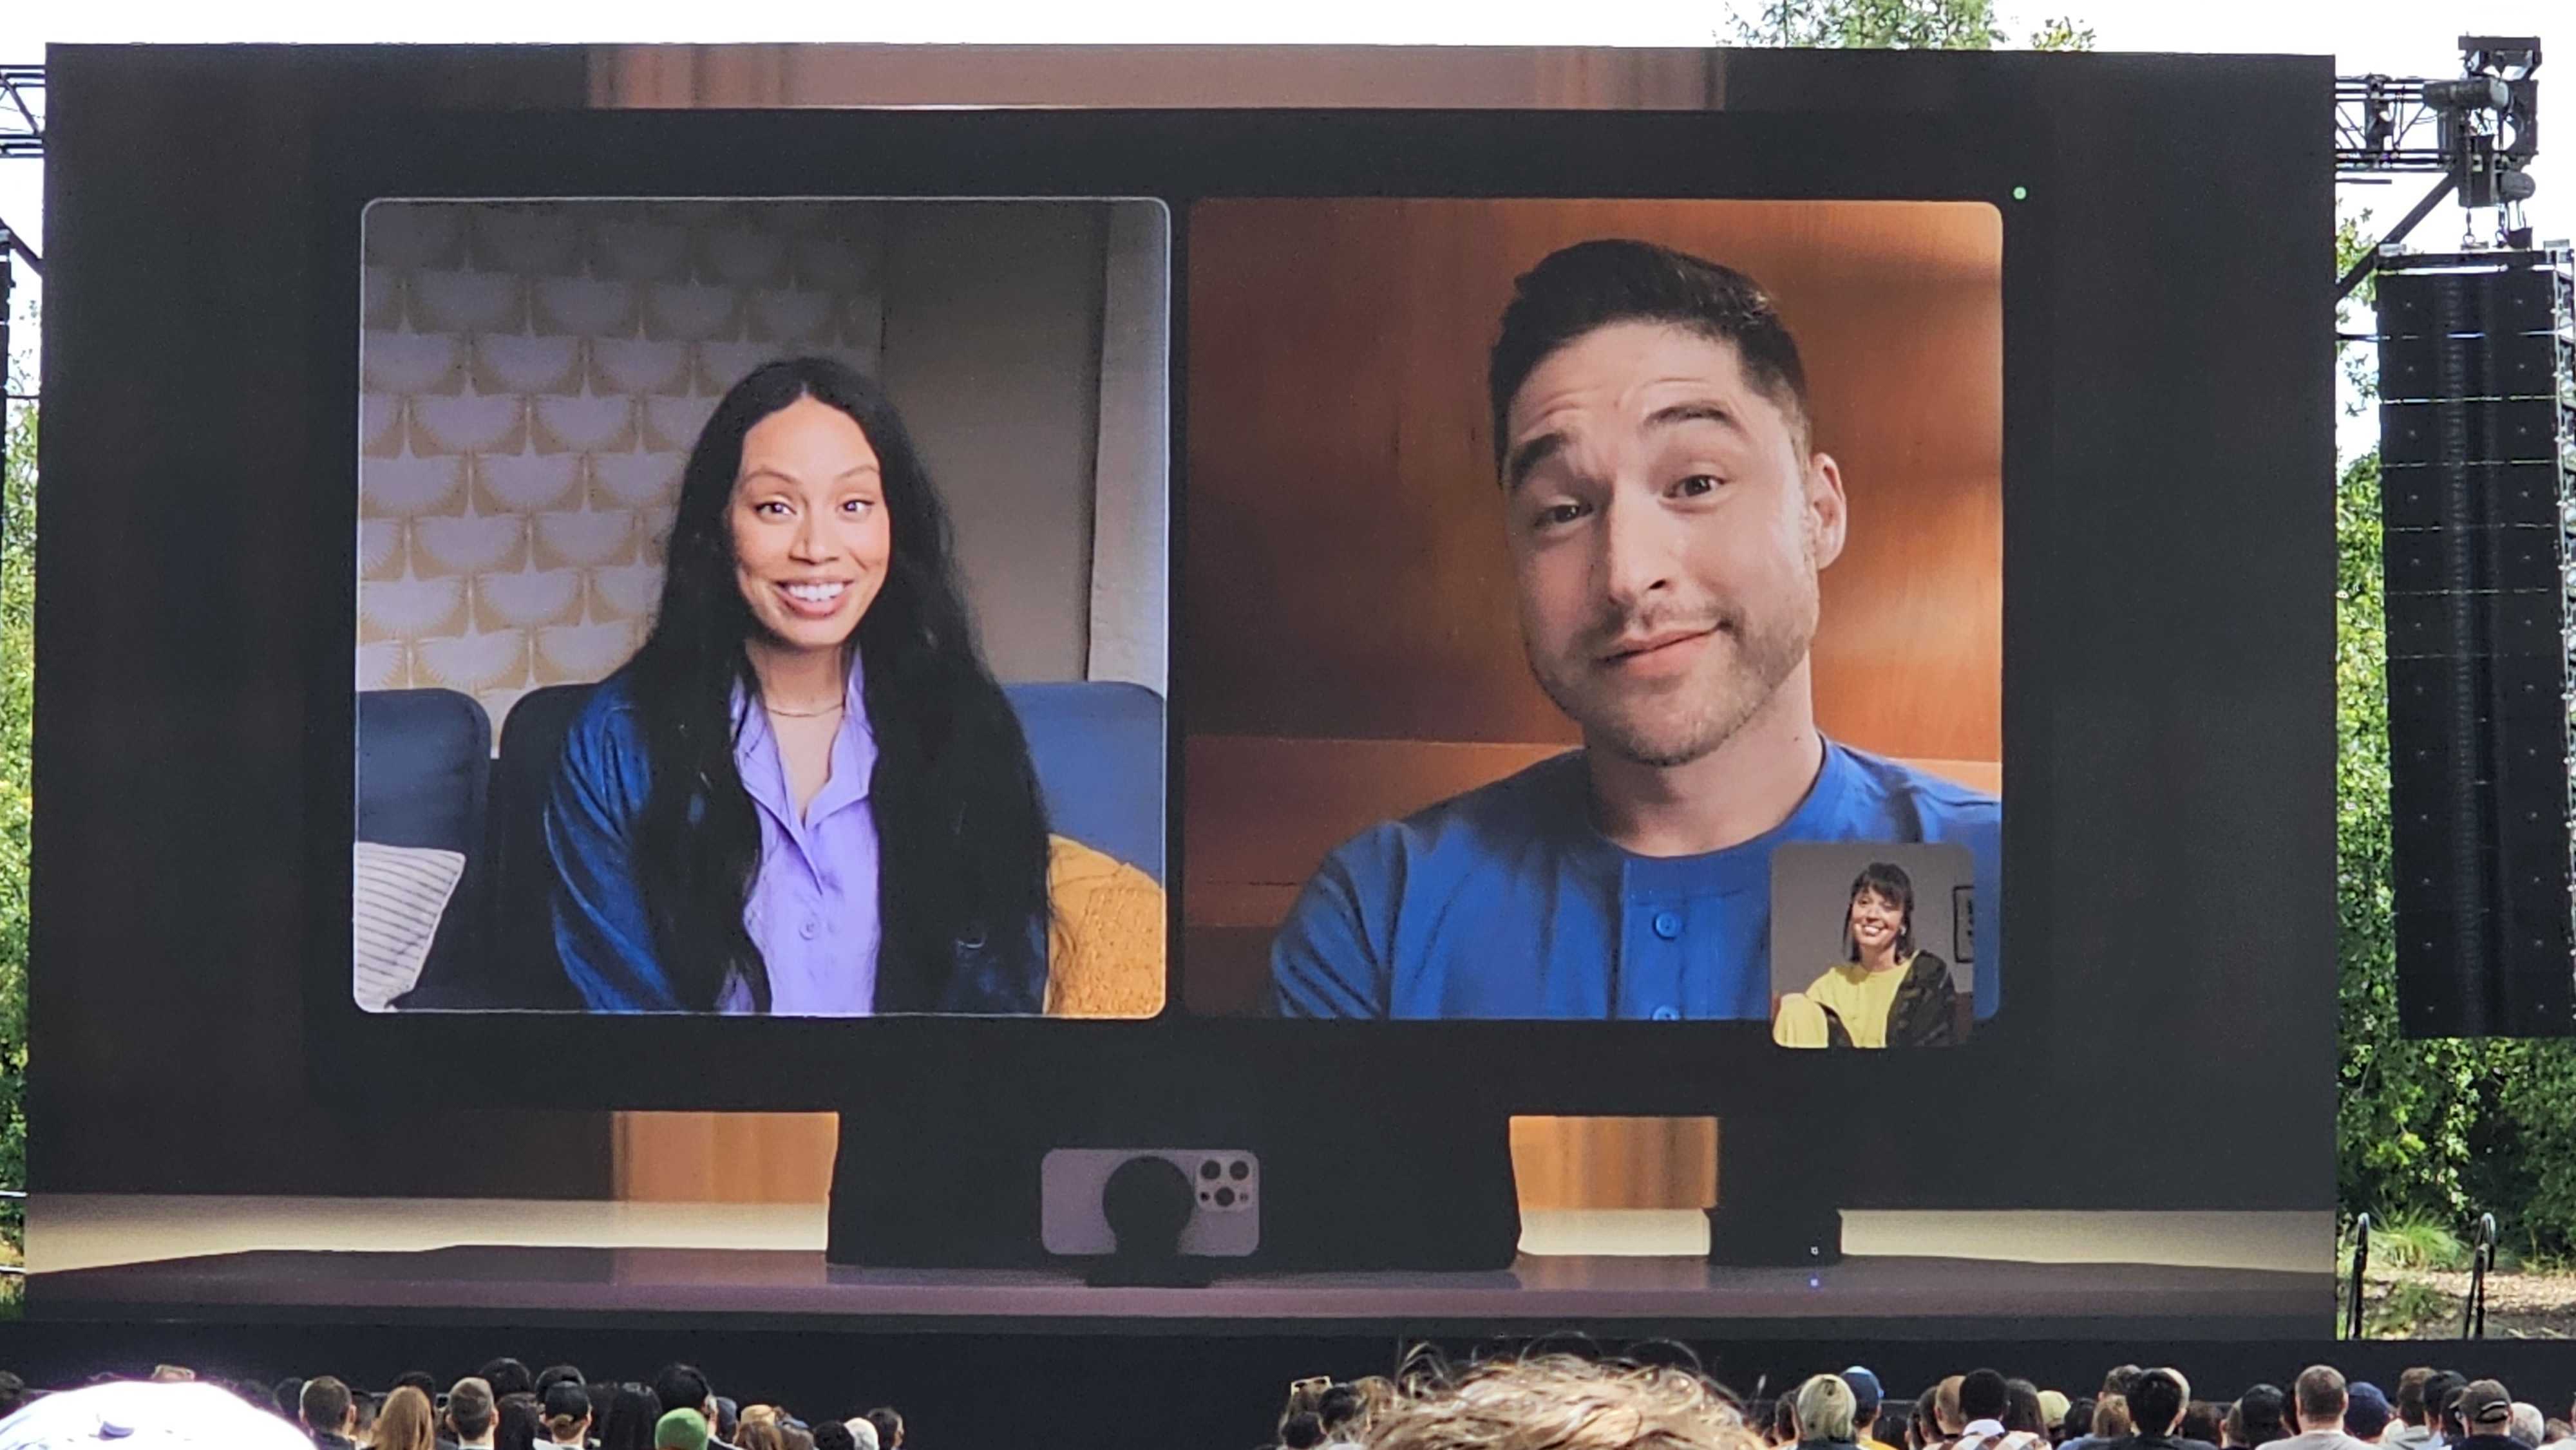 Using AppleTV for a web conference chat